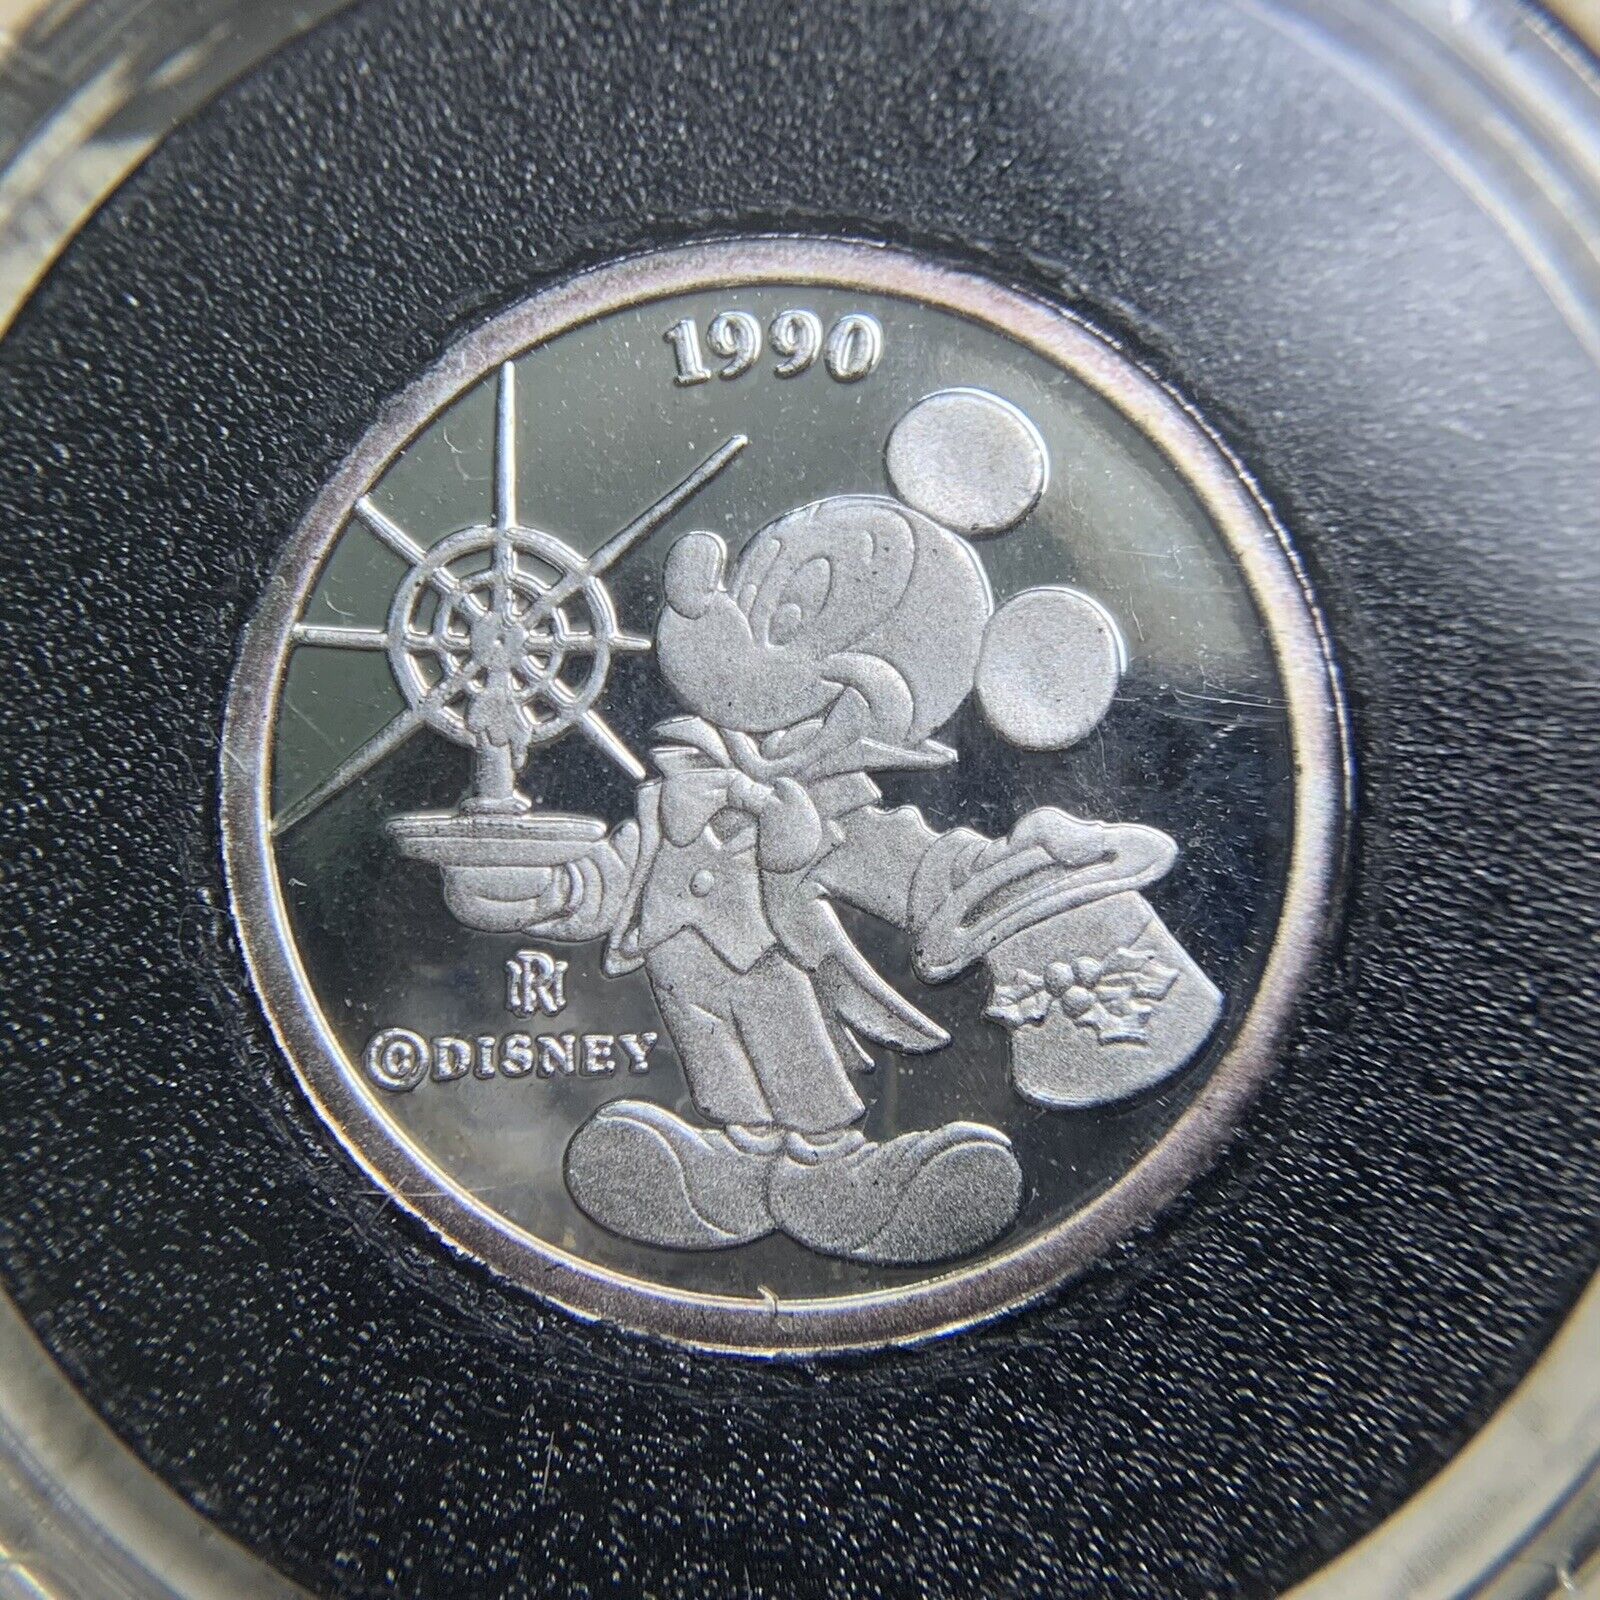 RARITIES MINT DISNEY HOLIDAY GREETINGS .999 Pure Silver Coin 1990/1991 Mickey #1